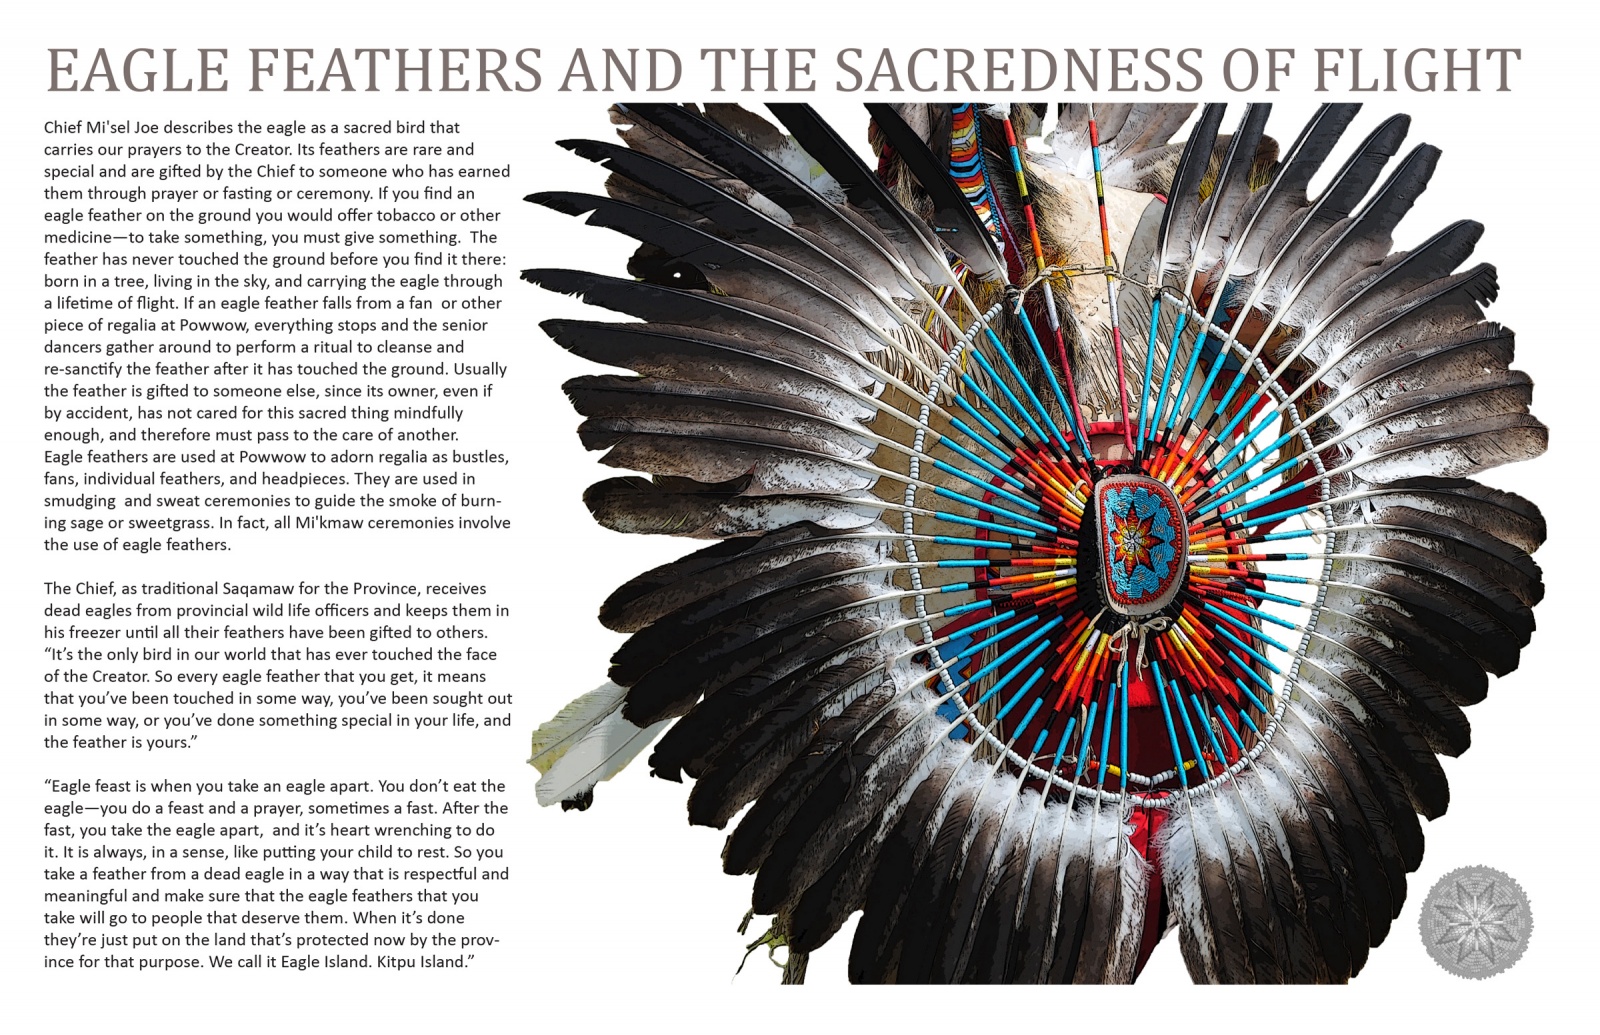 Eagle Feathers and the Sacredness of Flight